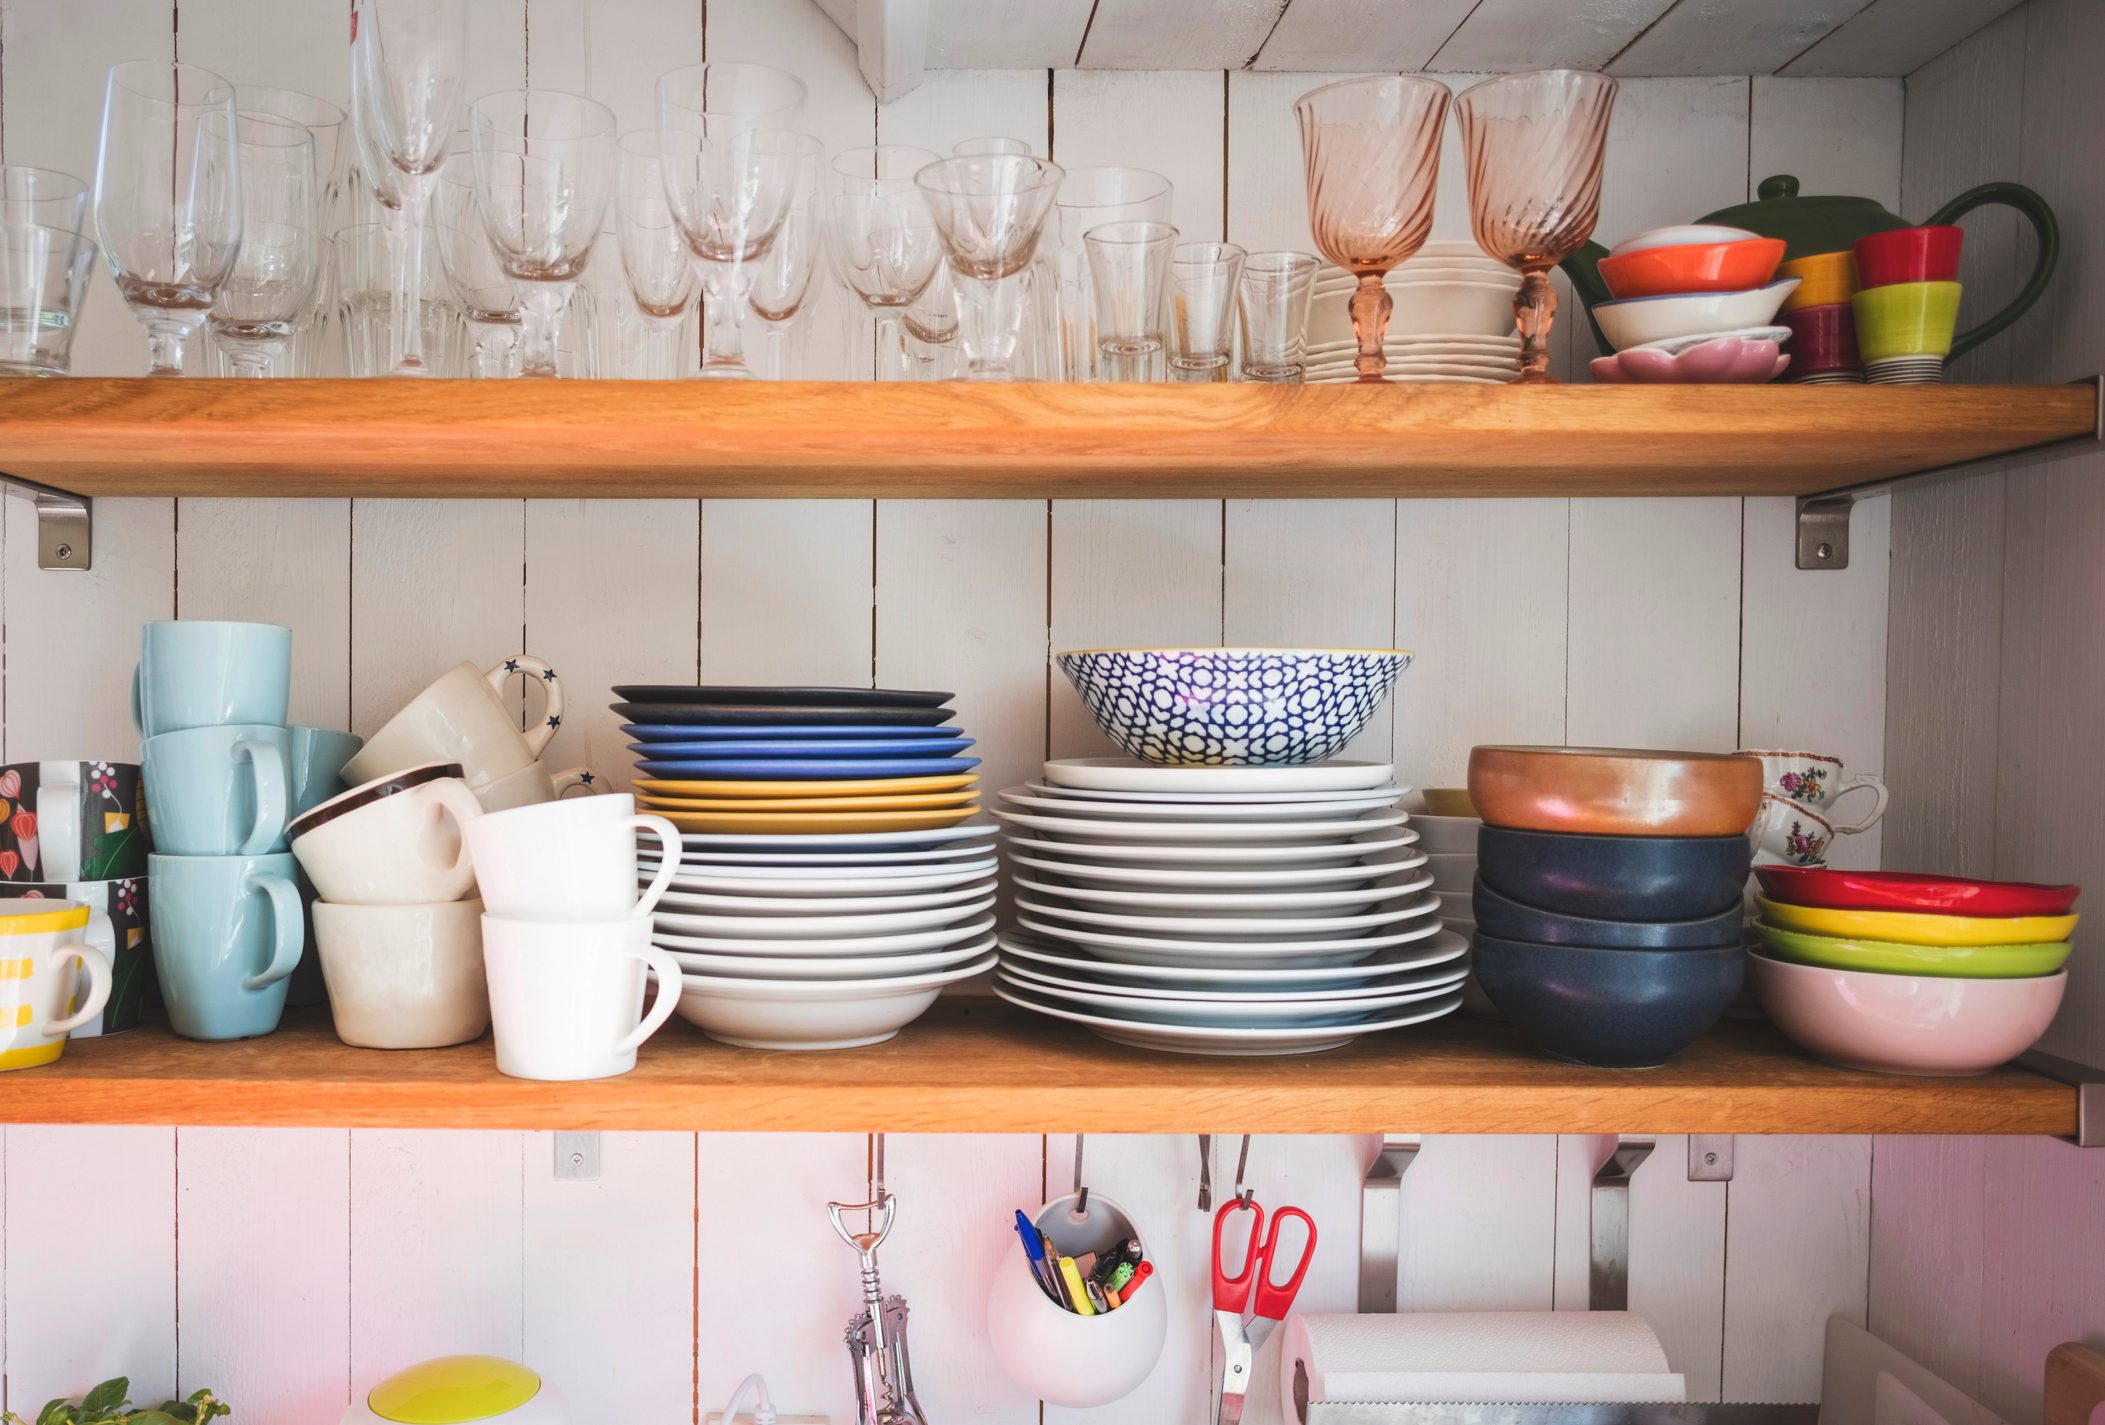 Crockery and drinking glasses on shelves in kitchen at home